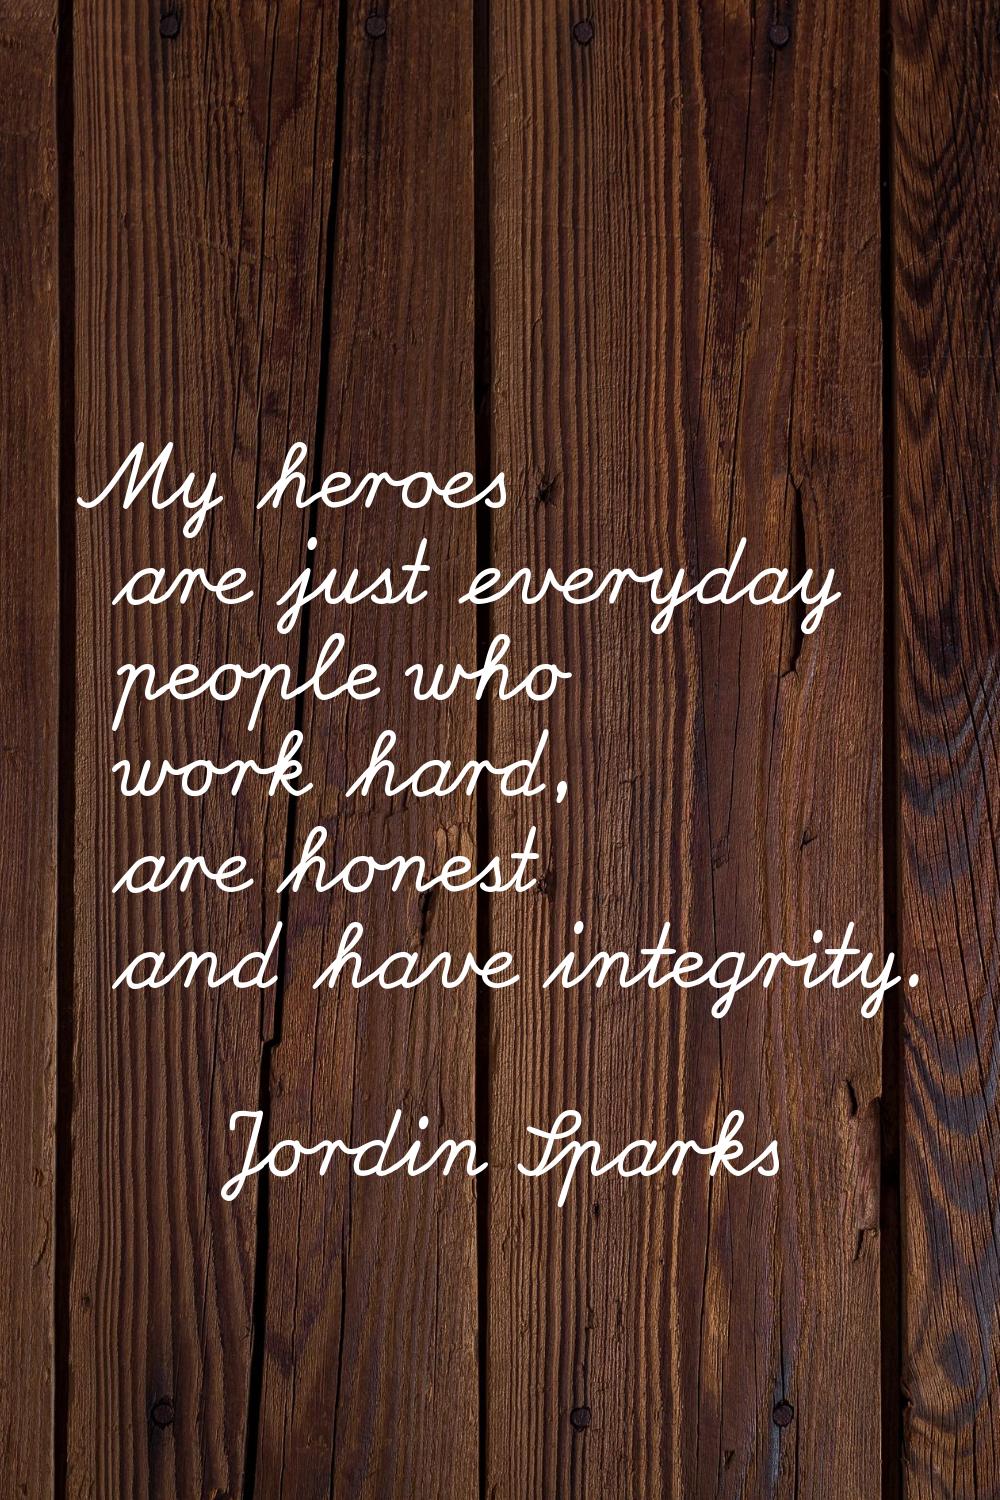 My heroes are just everyday people who work hard, are honest and have integrity.